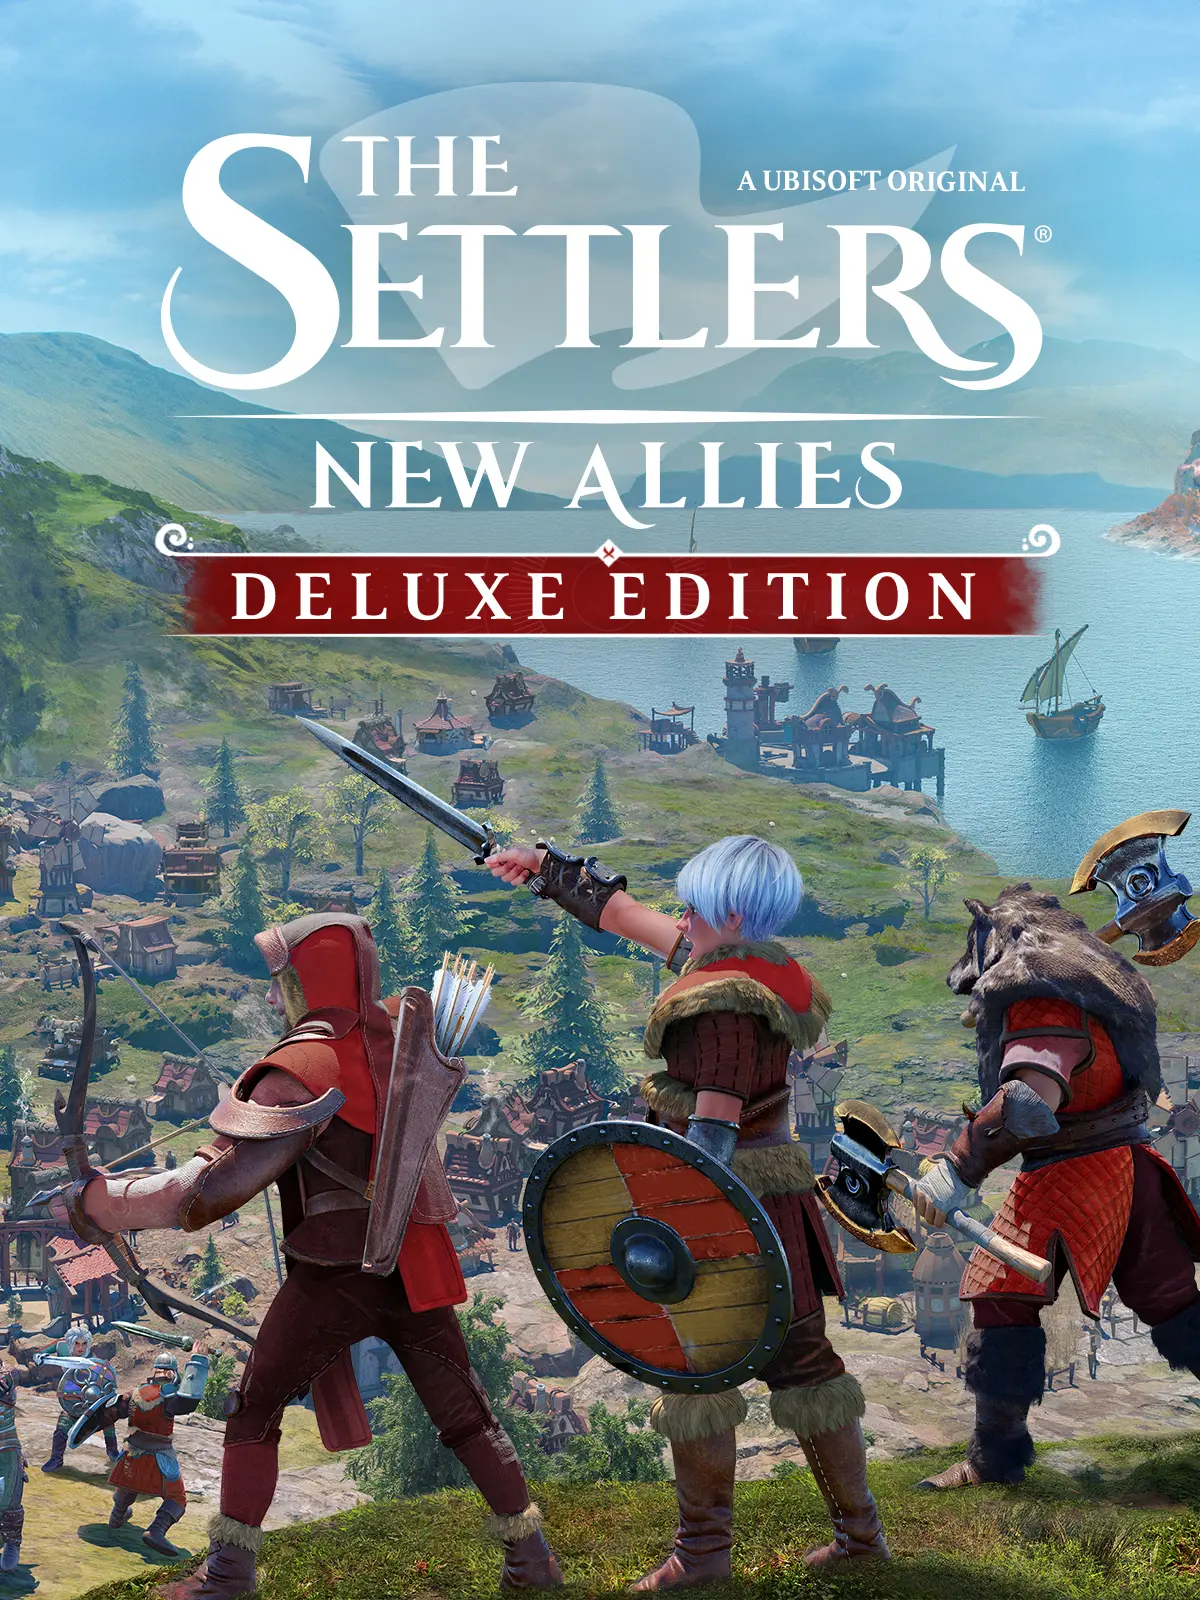 The Settlers: New Allies Deluxe Edition (EU) (PC) - Ubisoft Connect - Digital Code